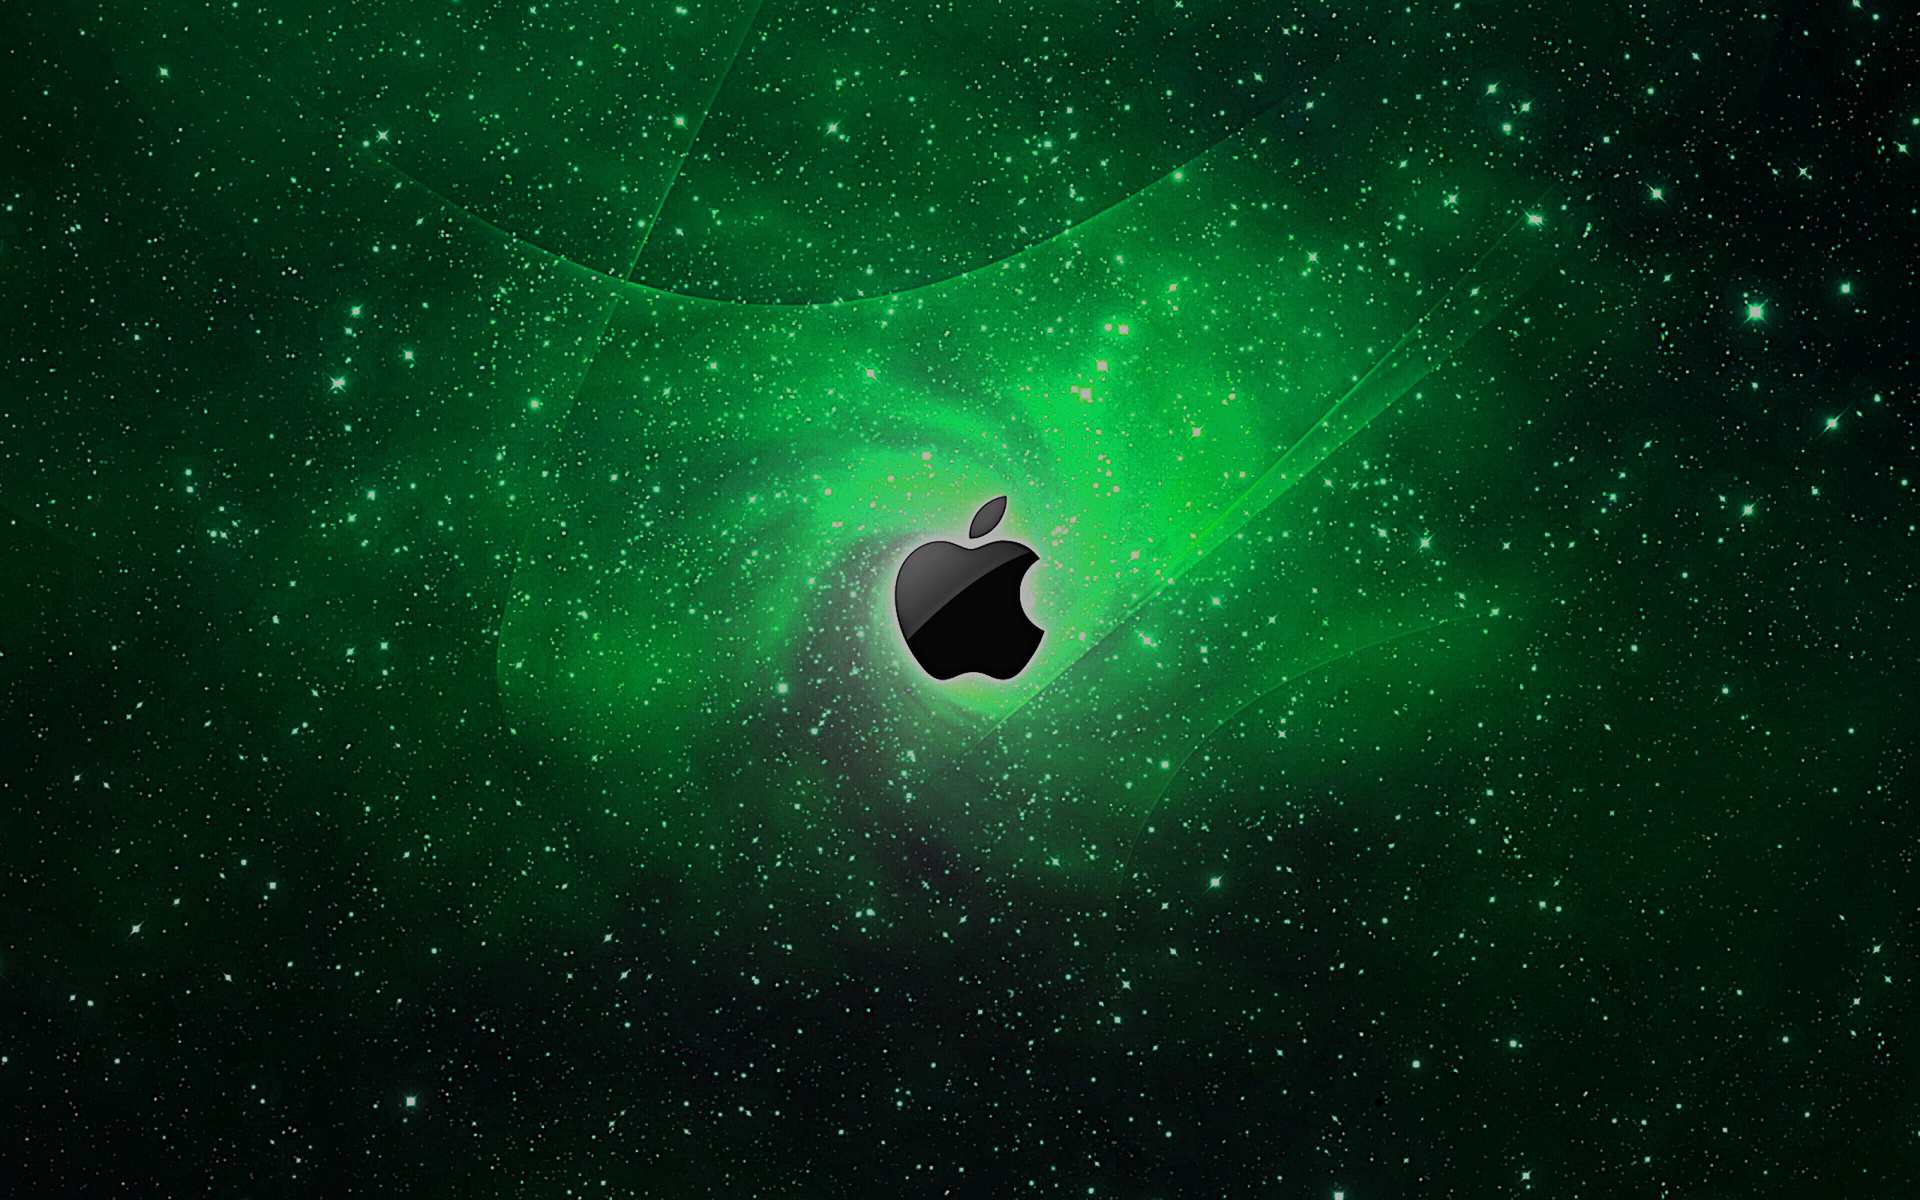 Apple Background Wallpaper Pictures Image